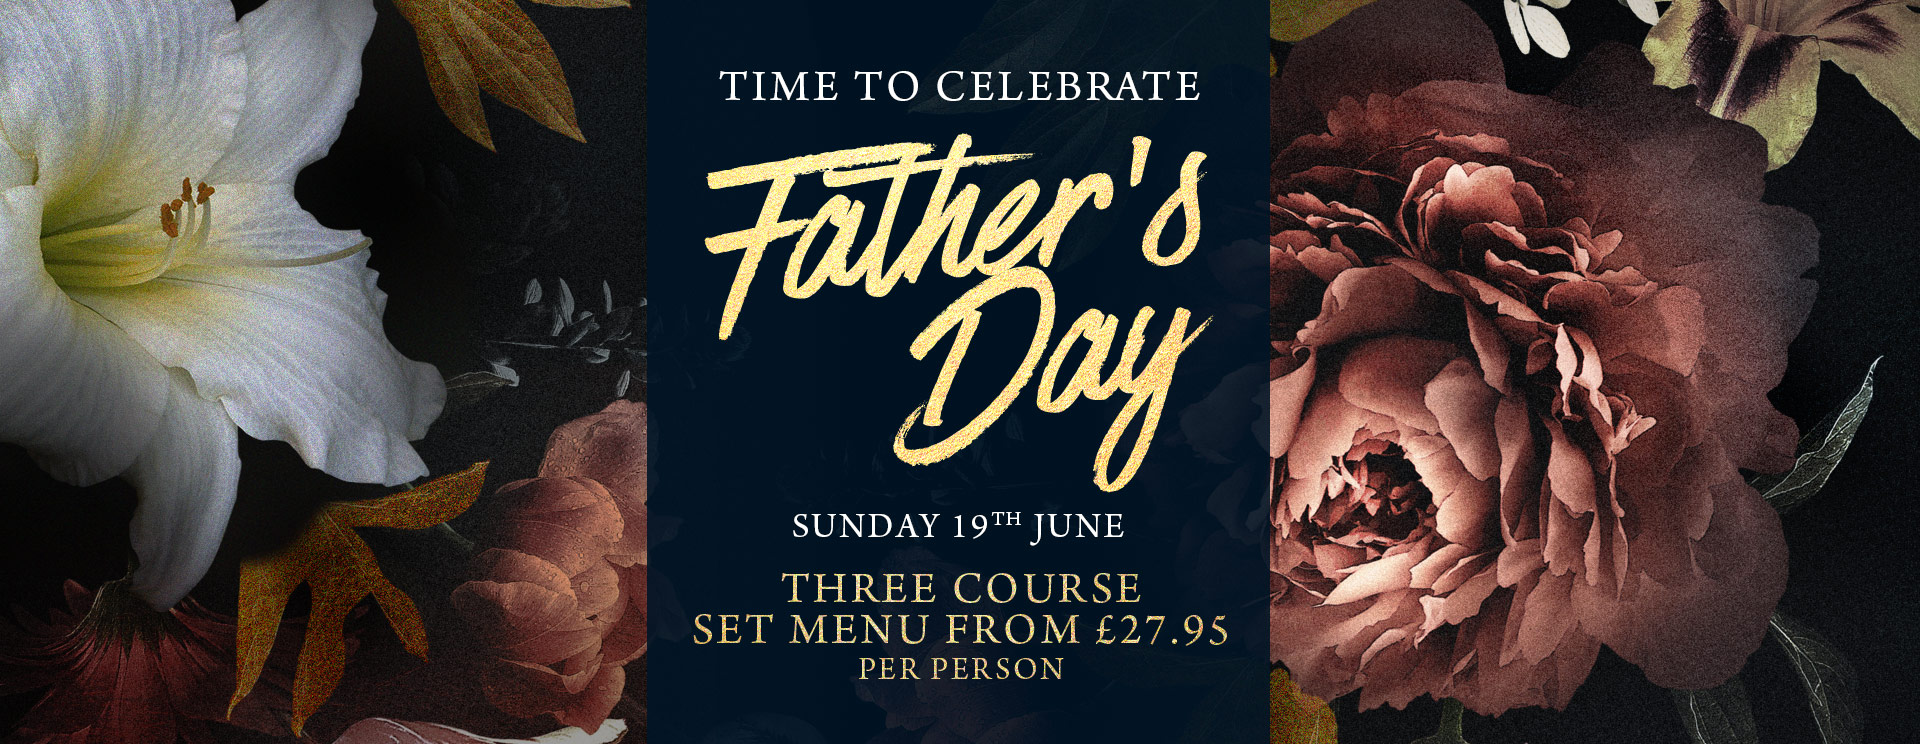 Fathers Day at The Fox & Hounds